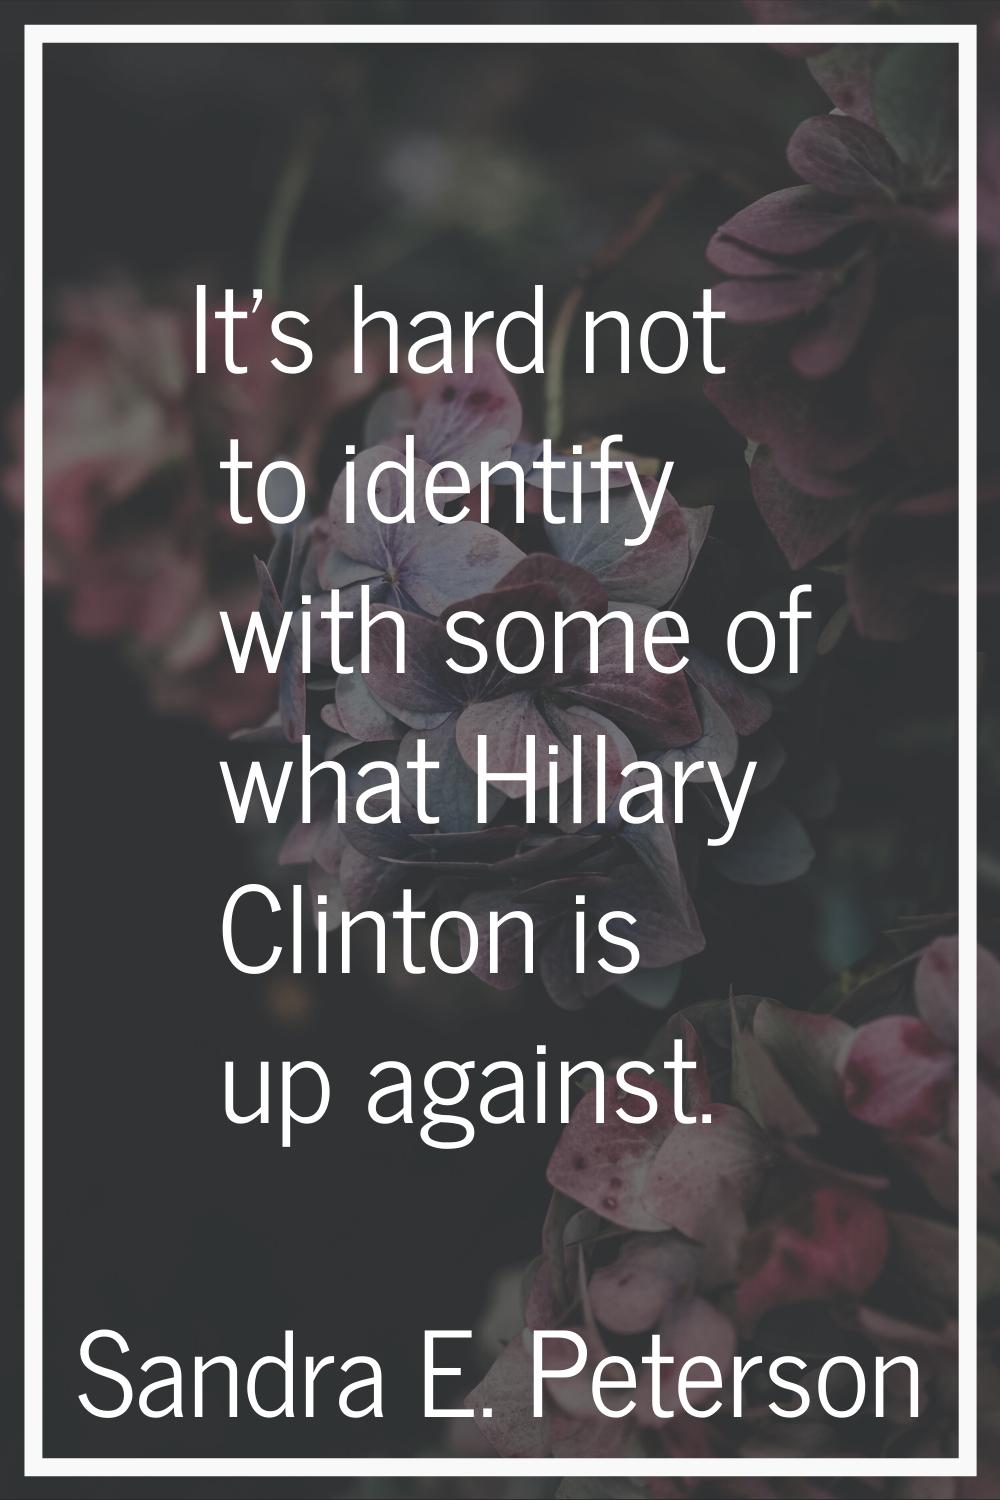 It's hard not to identify with some of what Hillary Clinton is up against.